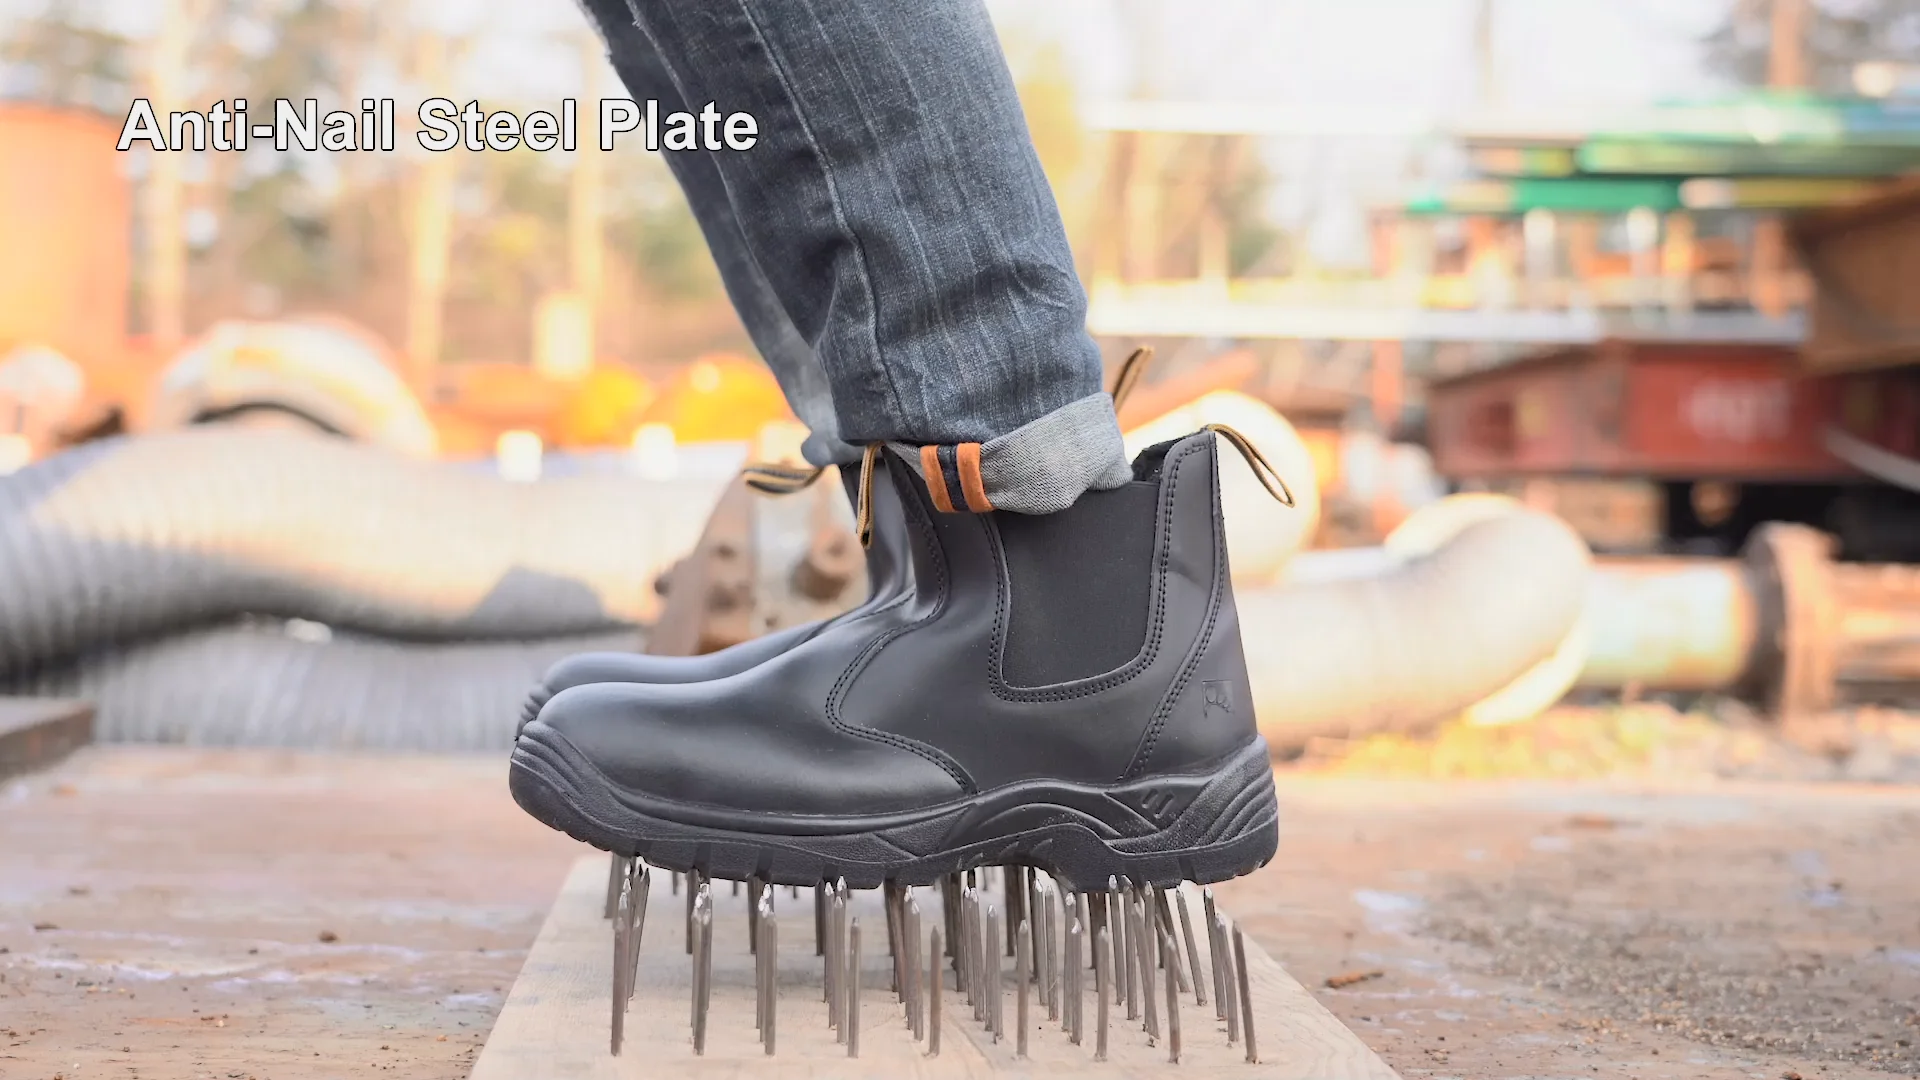 8025 Free Sock Slip On Site Steel Toe Cap Mens Work Boots Shoes Dealer Boots SAFETOE Water Resistant Safety Boots CE Quality Certified